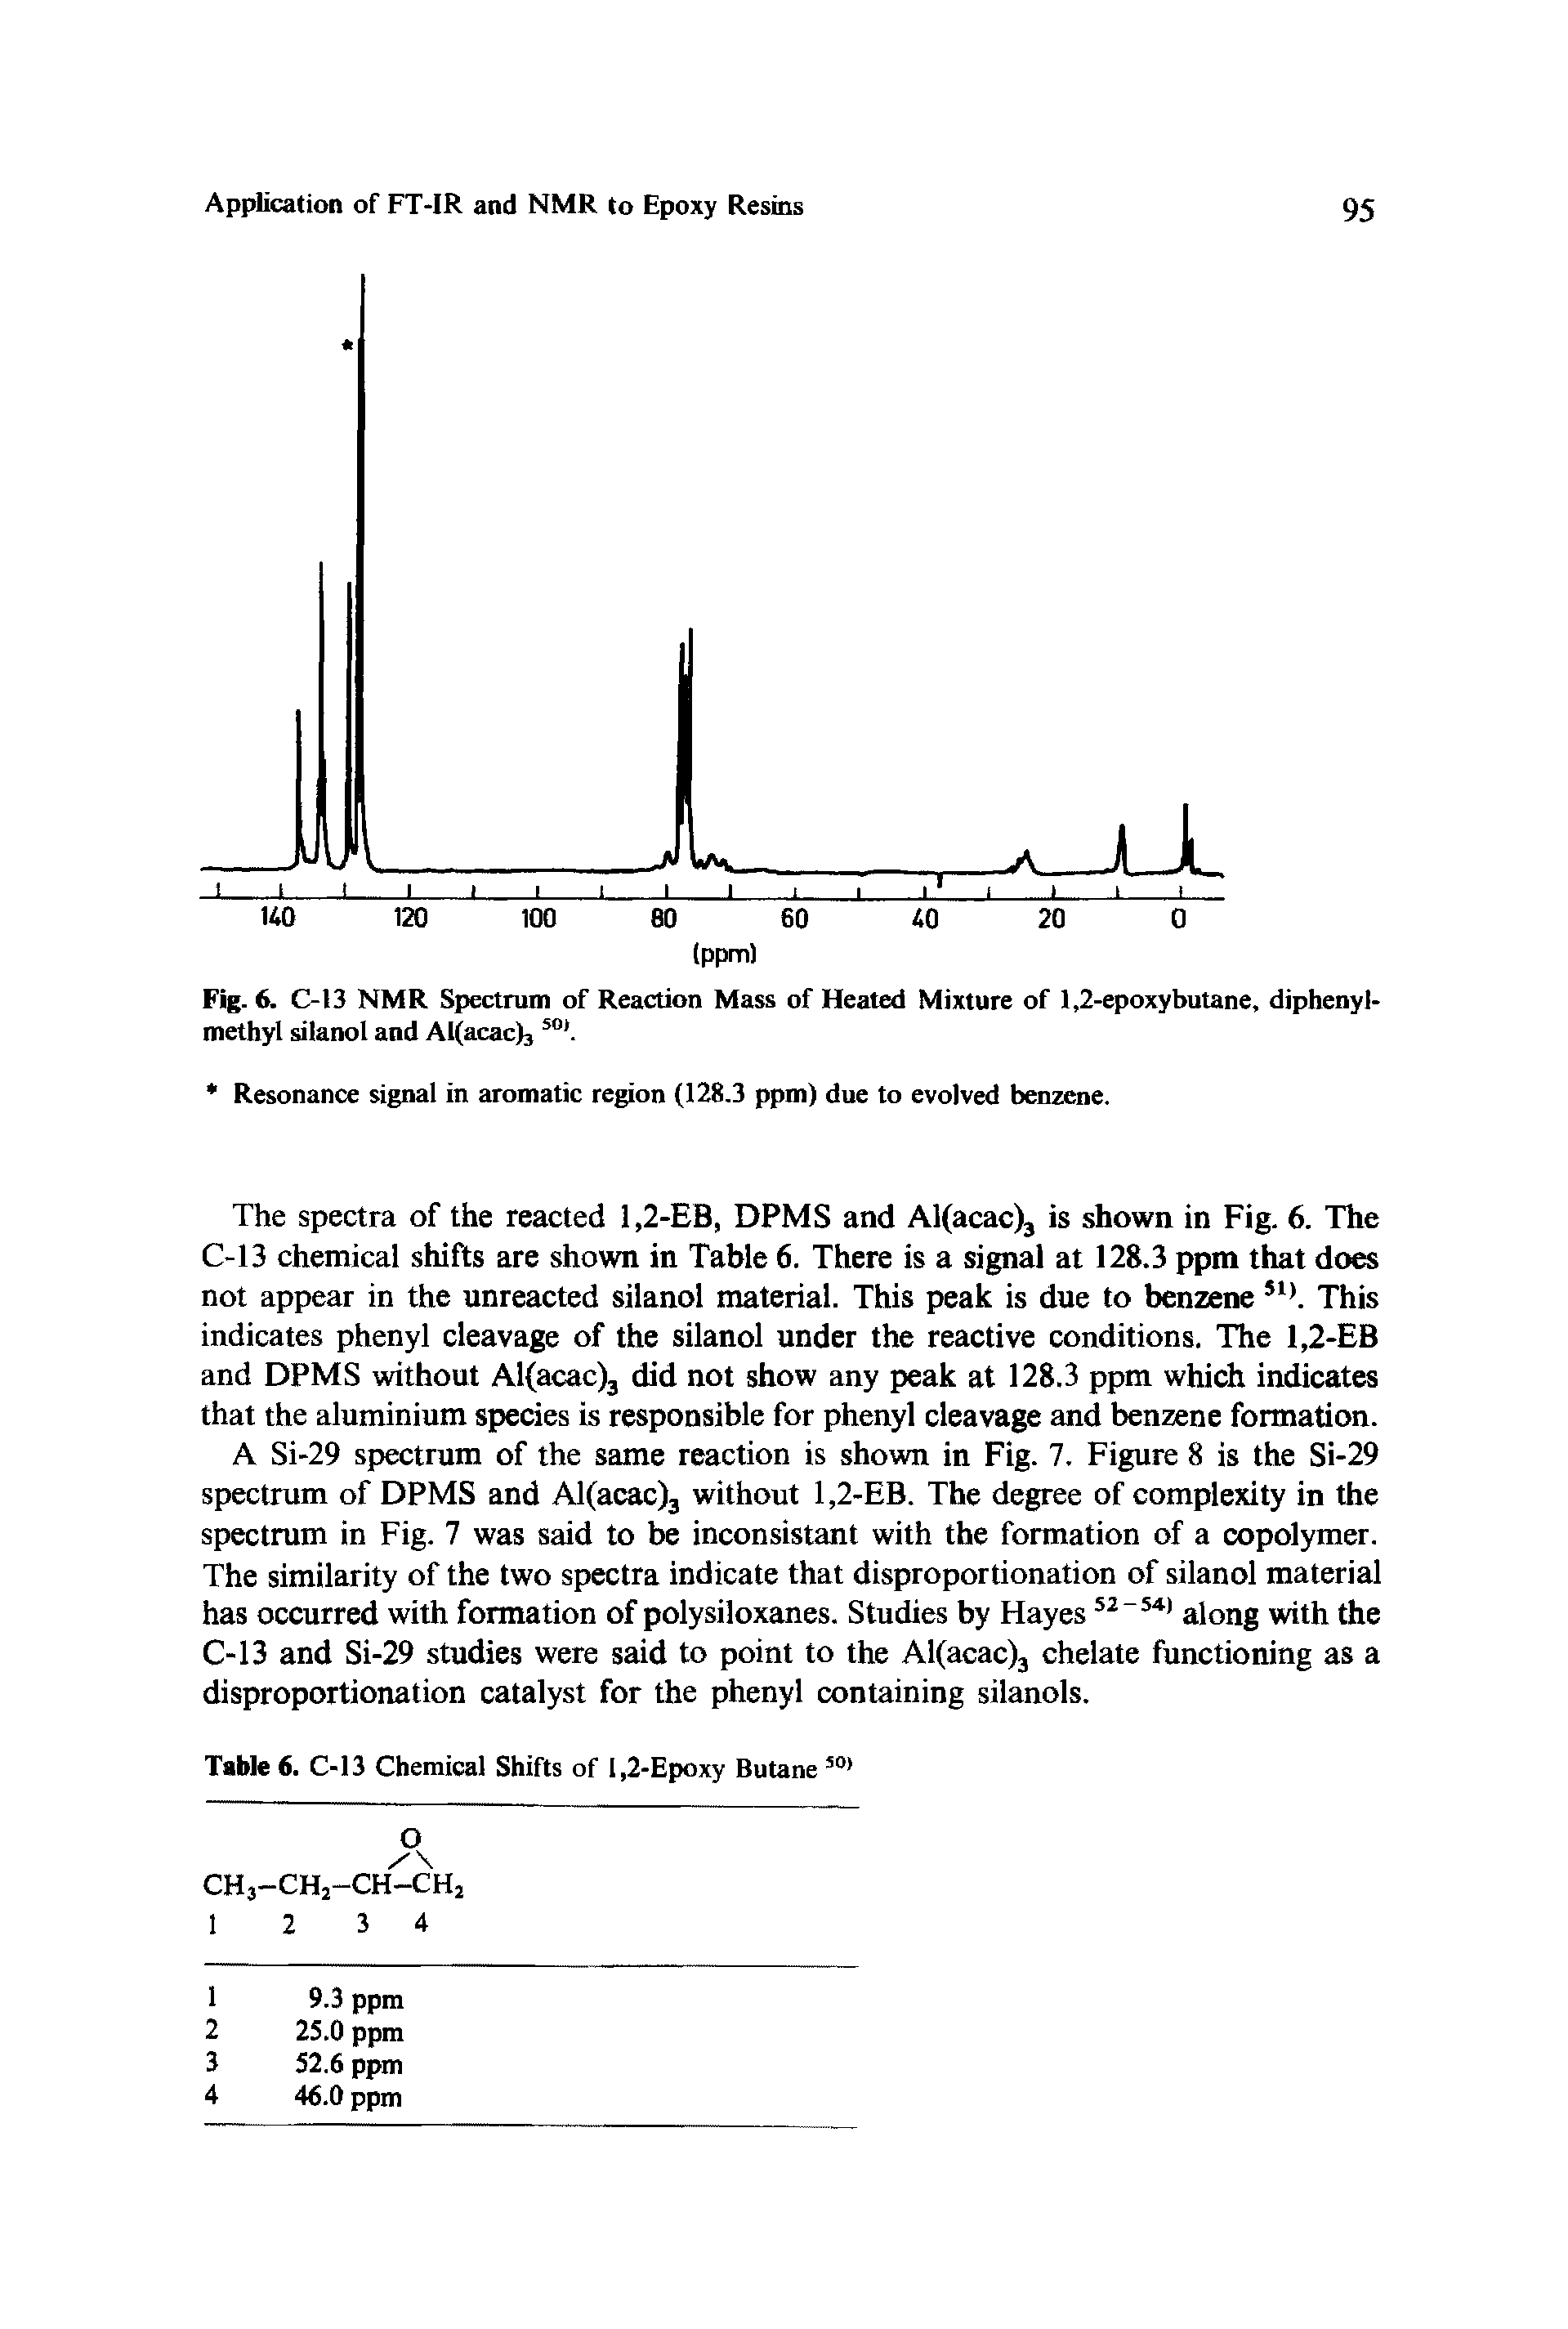 Fig. 6. C-13 NMR Spectrum of Reaction Mass of Heated Mixture of 1,2-epoxy butane, diphenyl-methyl silanol and Alfacach 501.